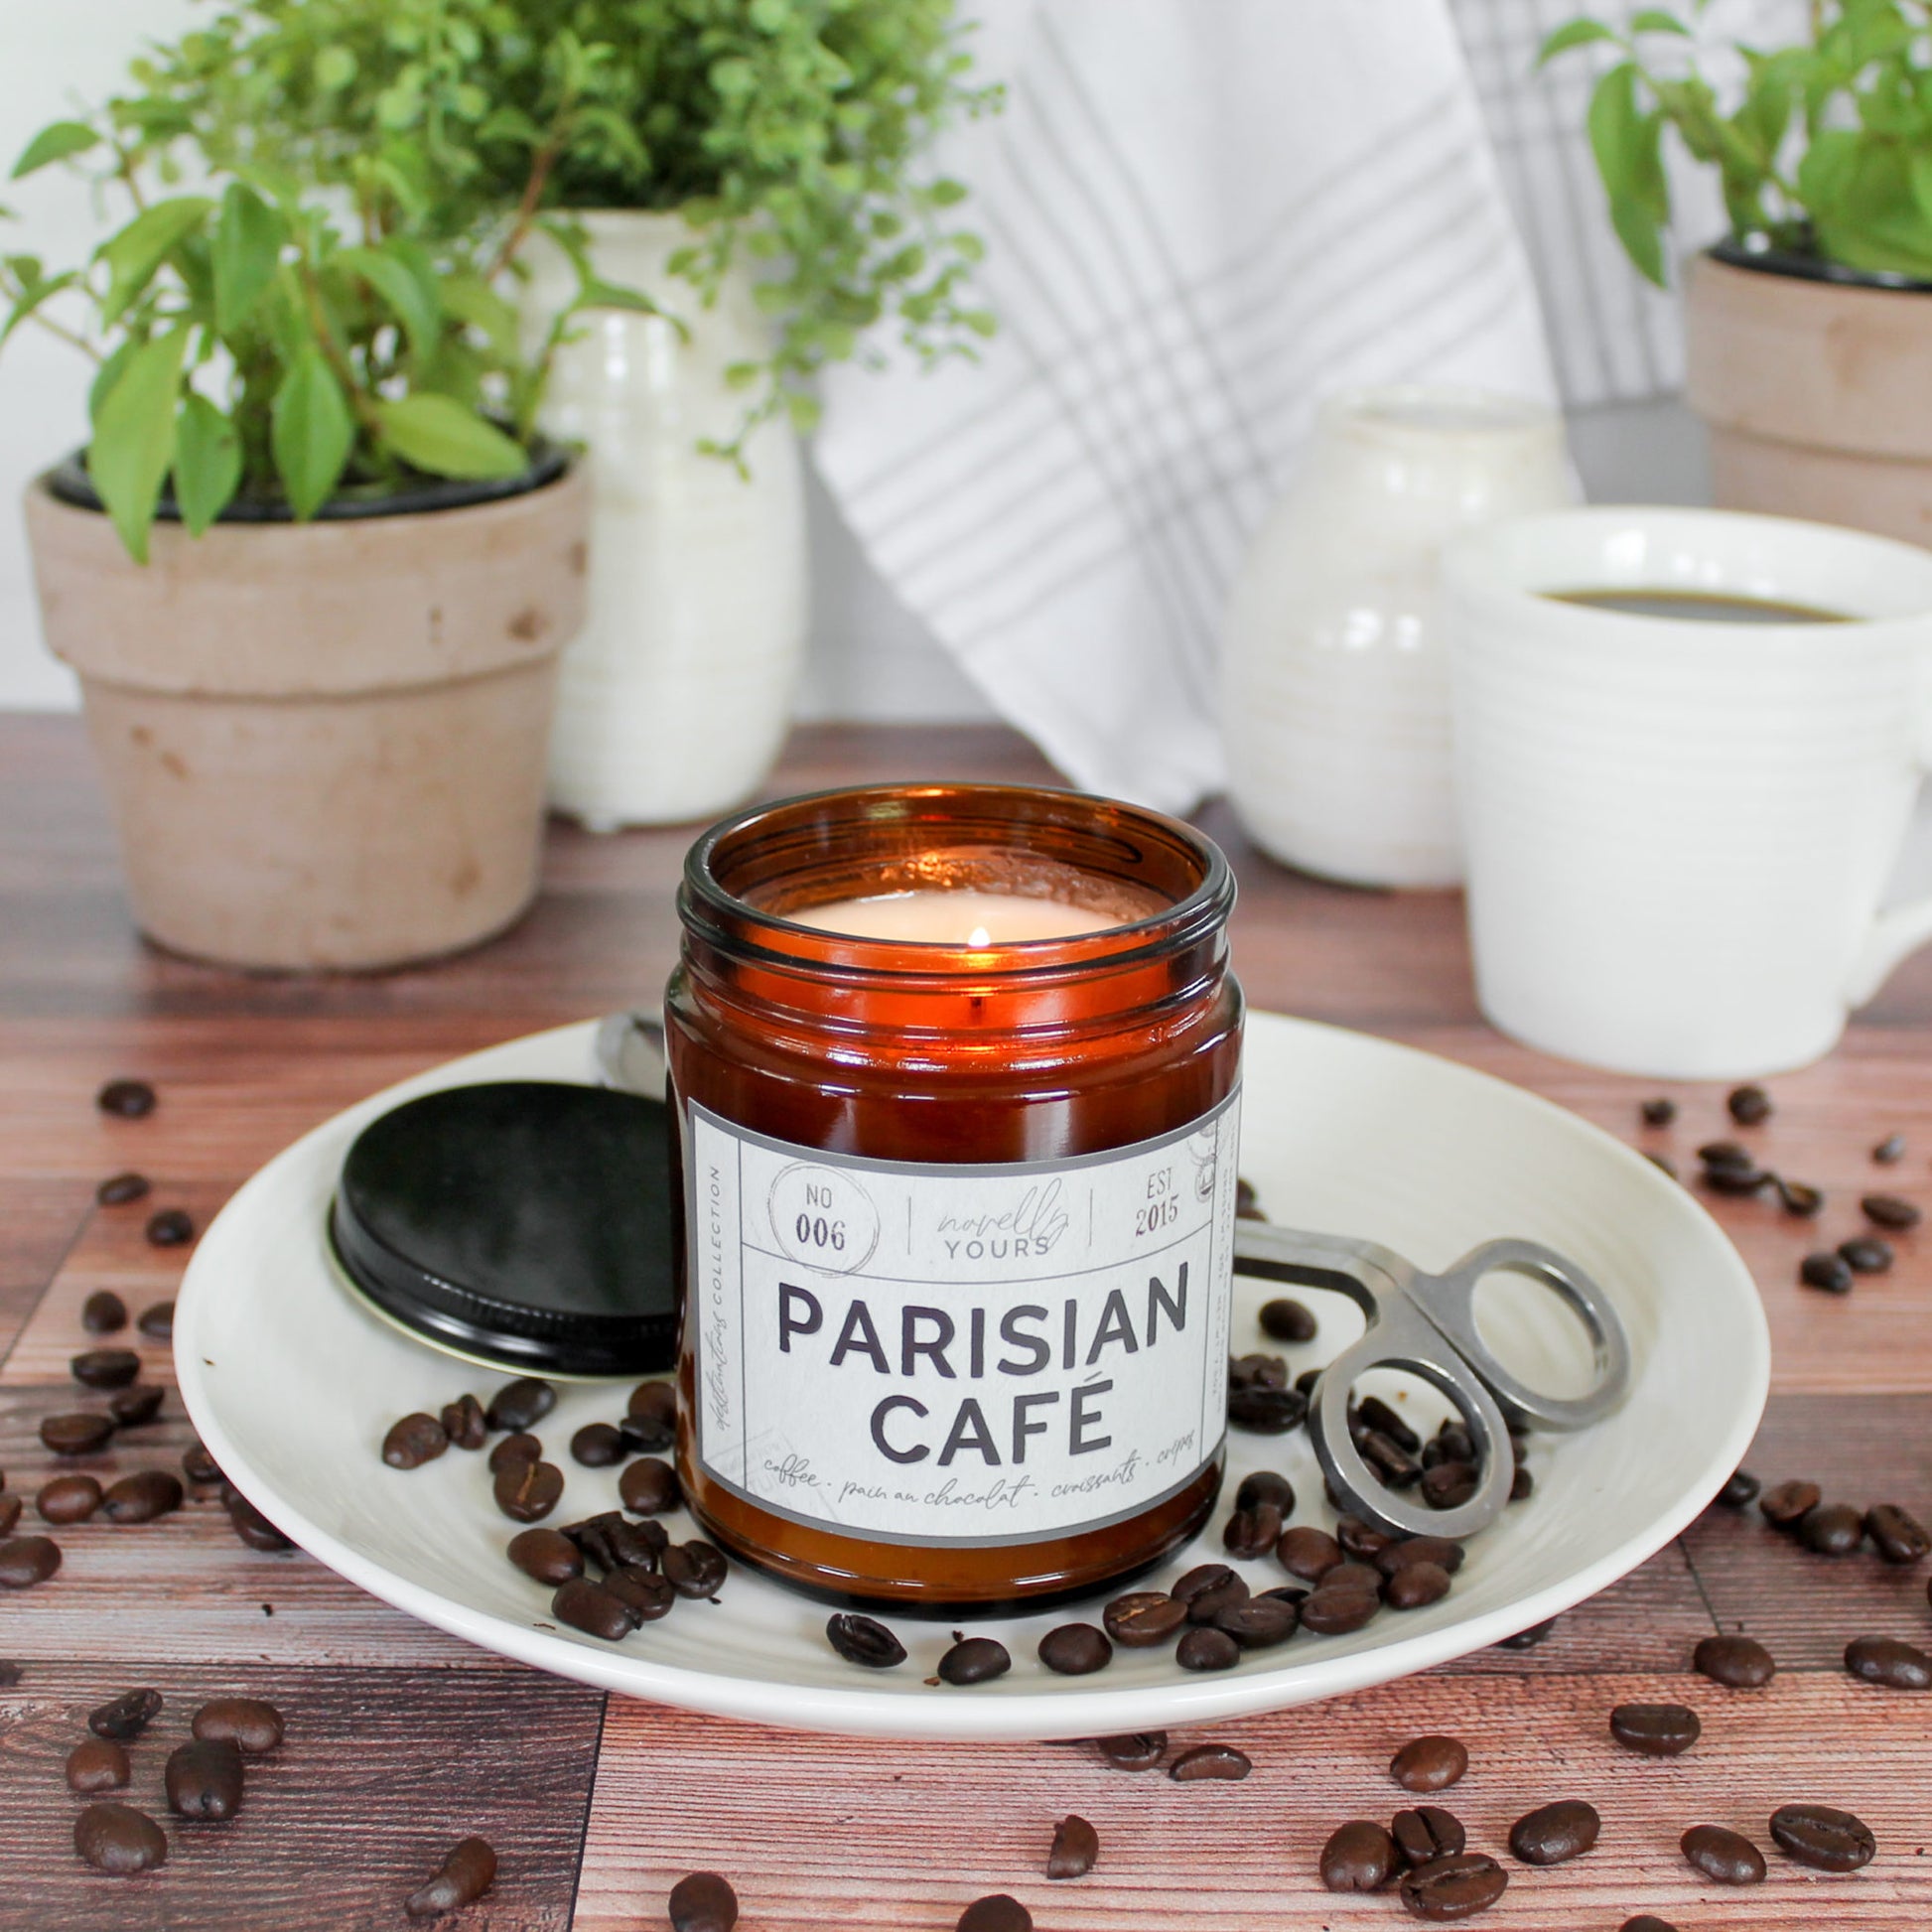 scented soy wax candle in amber jar, lit, surrounded by coffee beans reading "Parisian cafe"